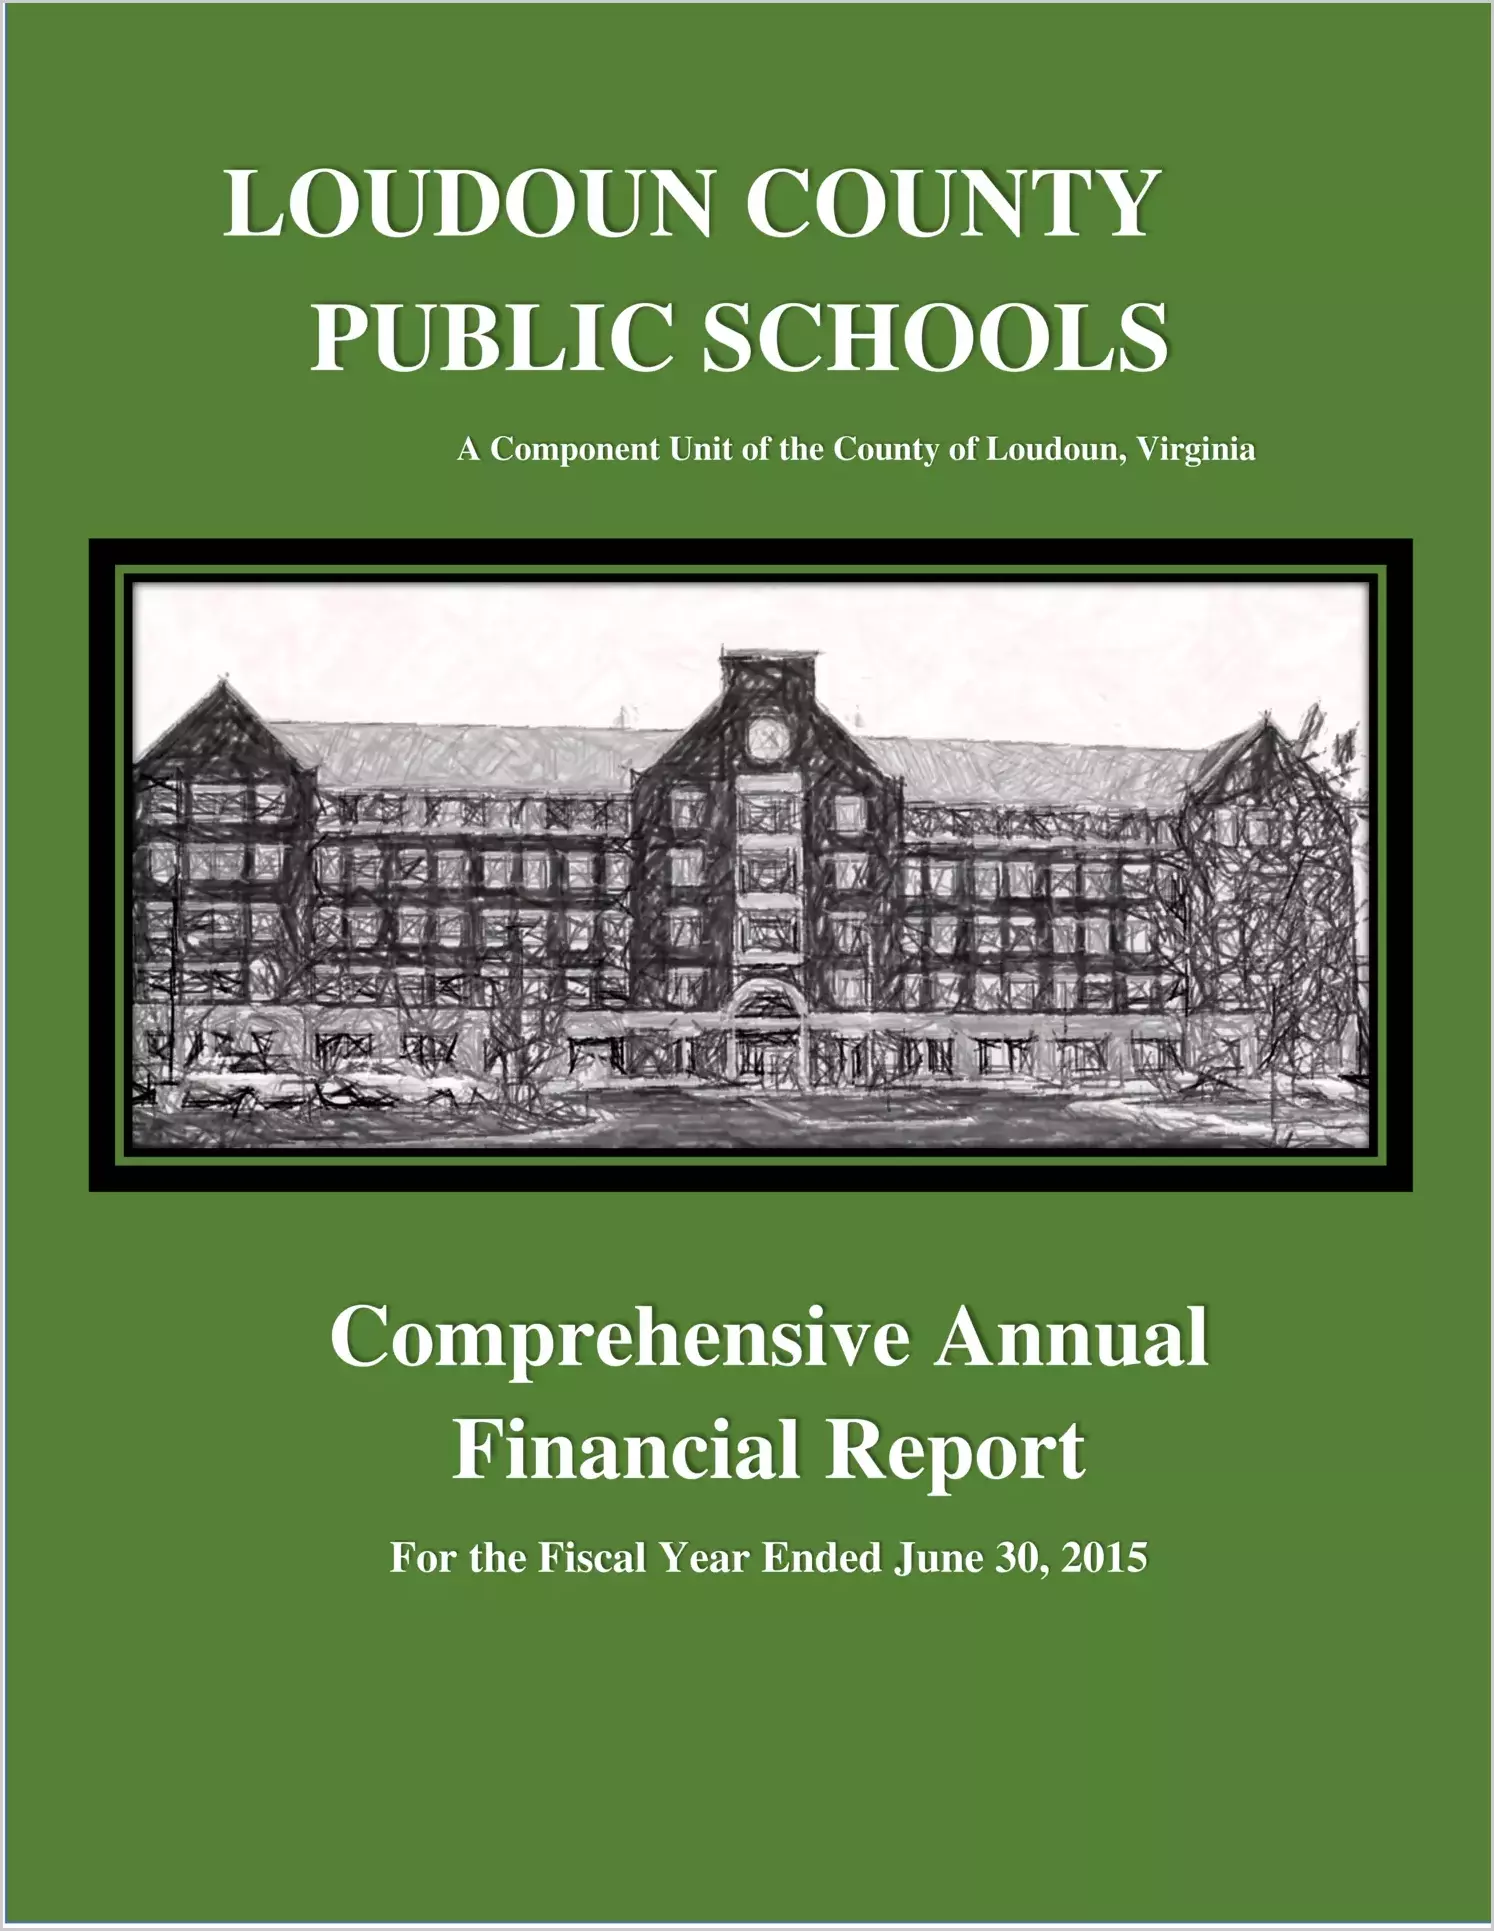 2015 Public Schools Annual Financial Report for County of Loudoun